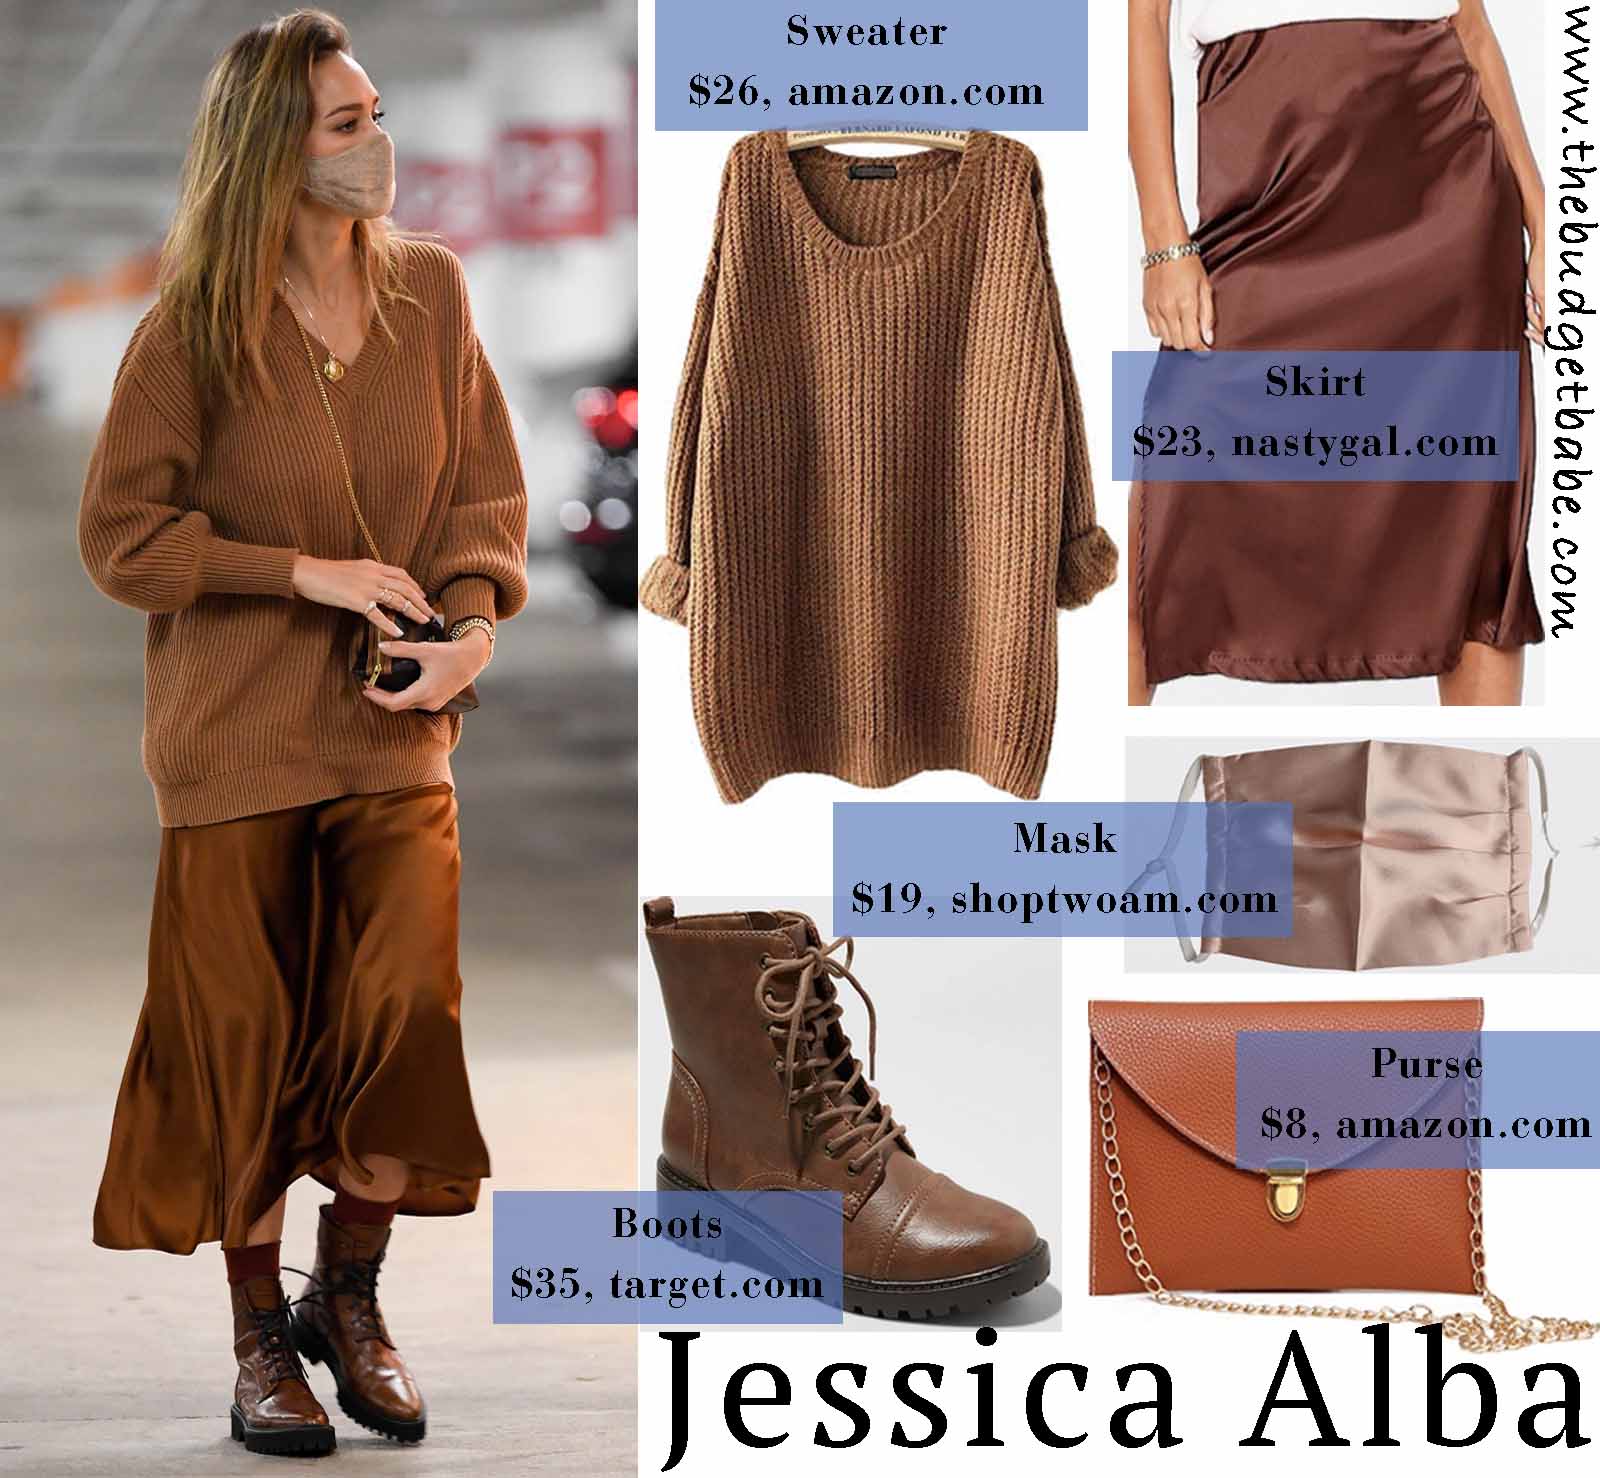 Jessica Alba's look is on point!